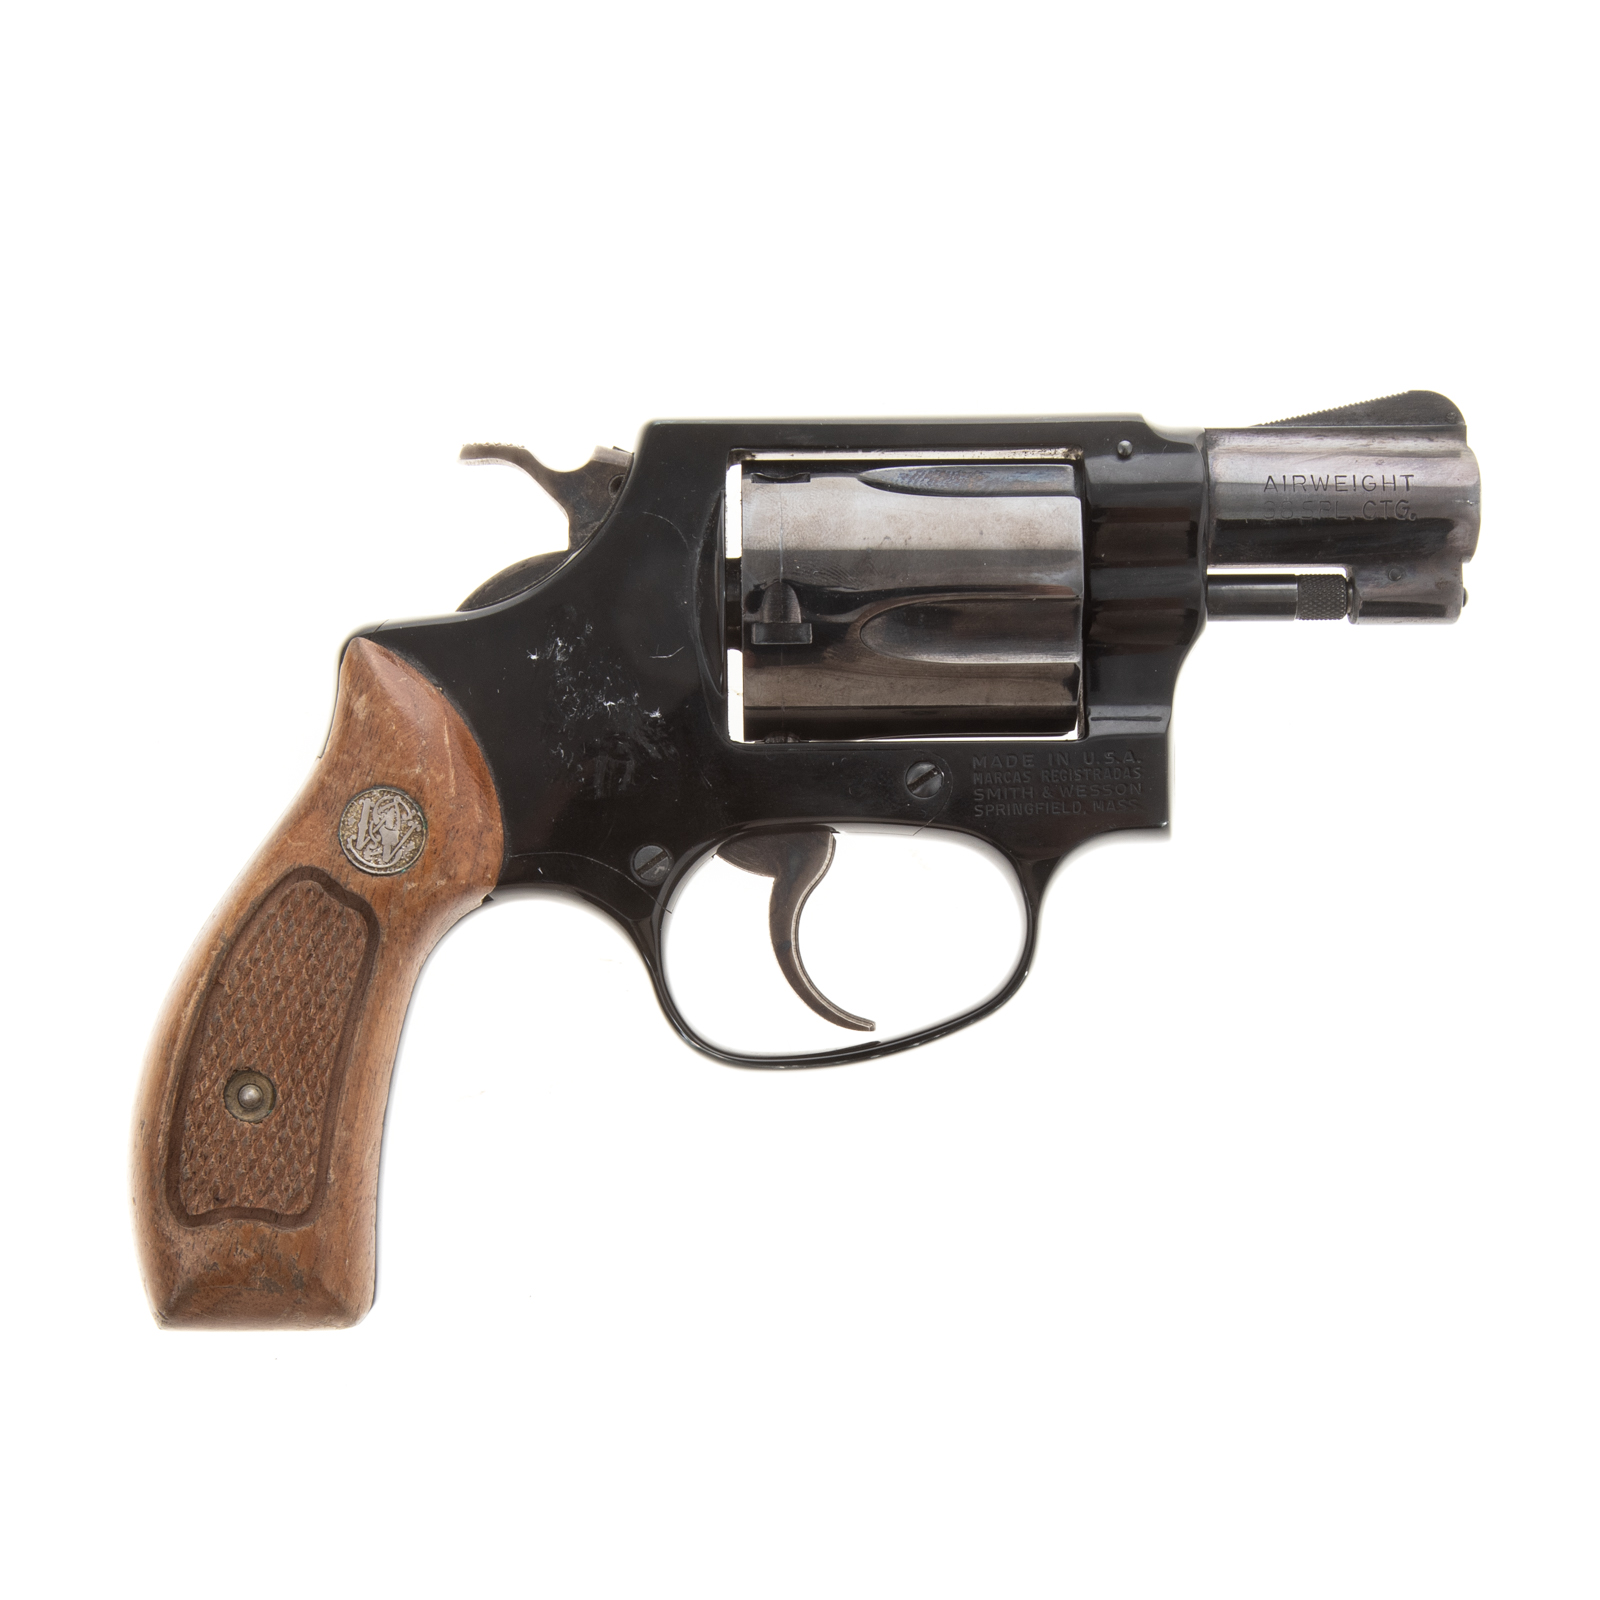 SMITH AND WESSON AIRWEIGHT DOUBLE 335486